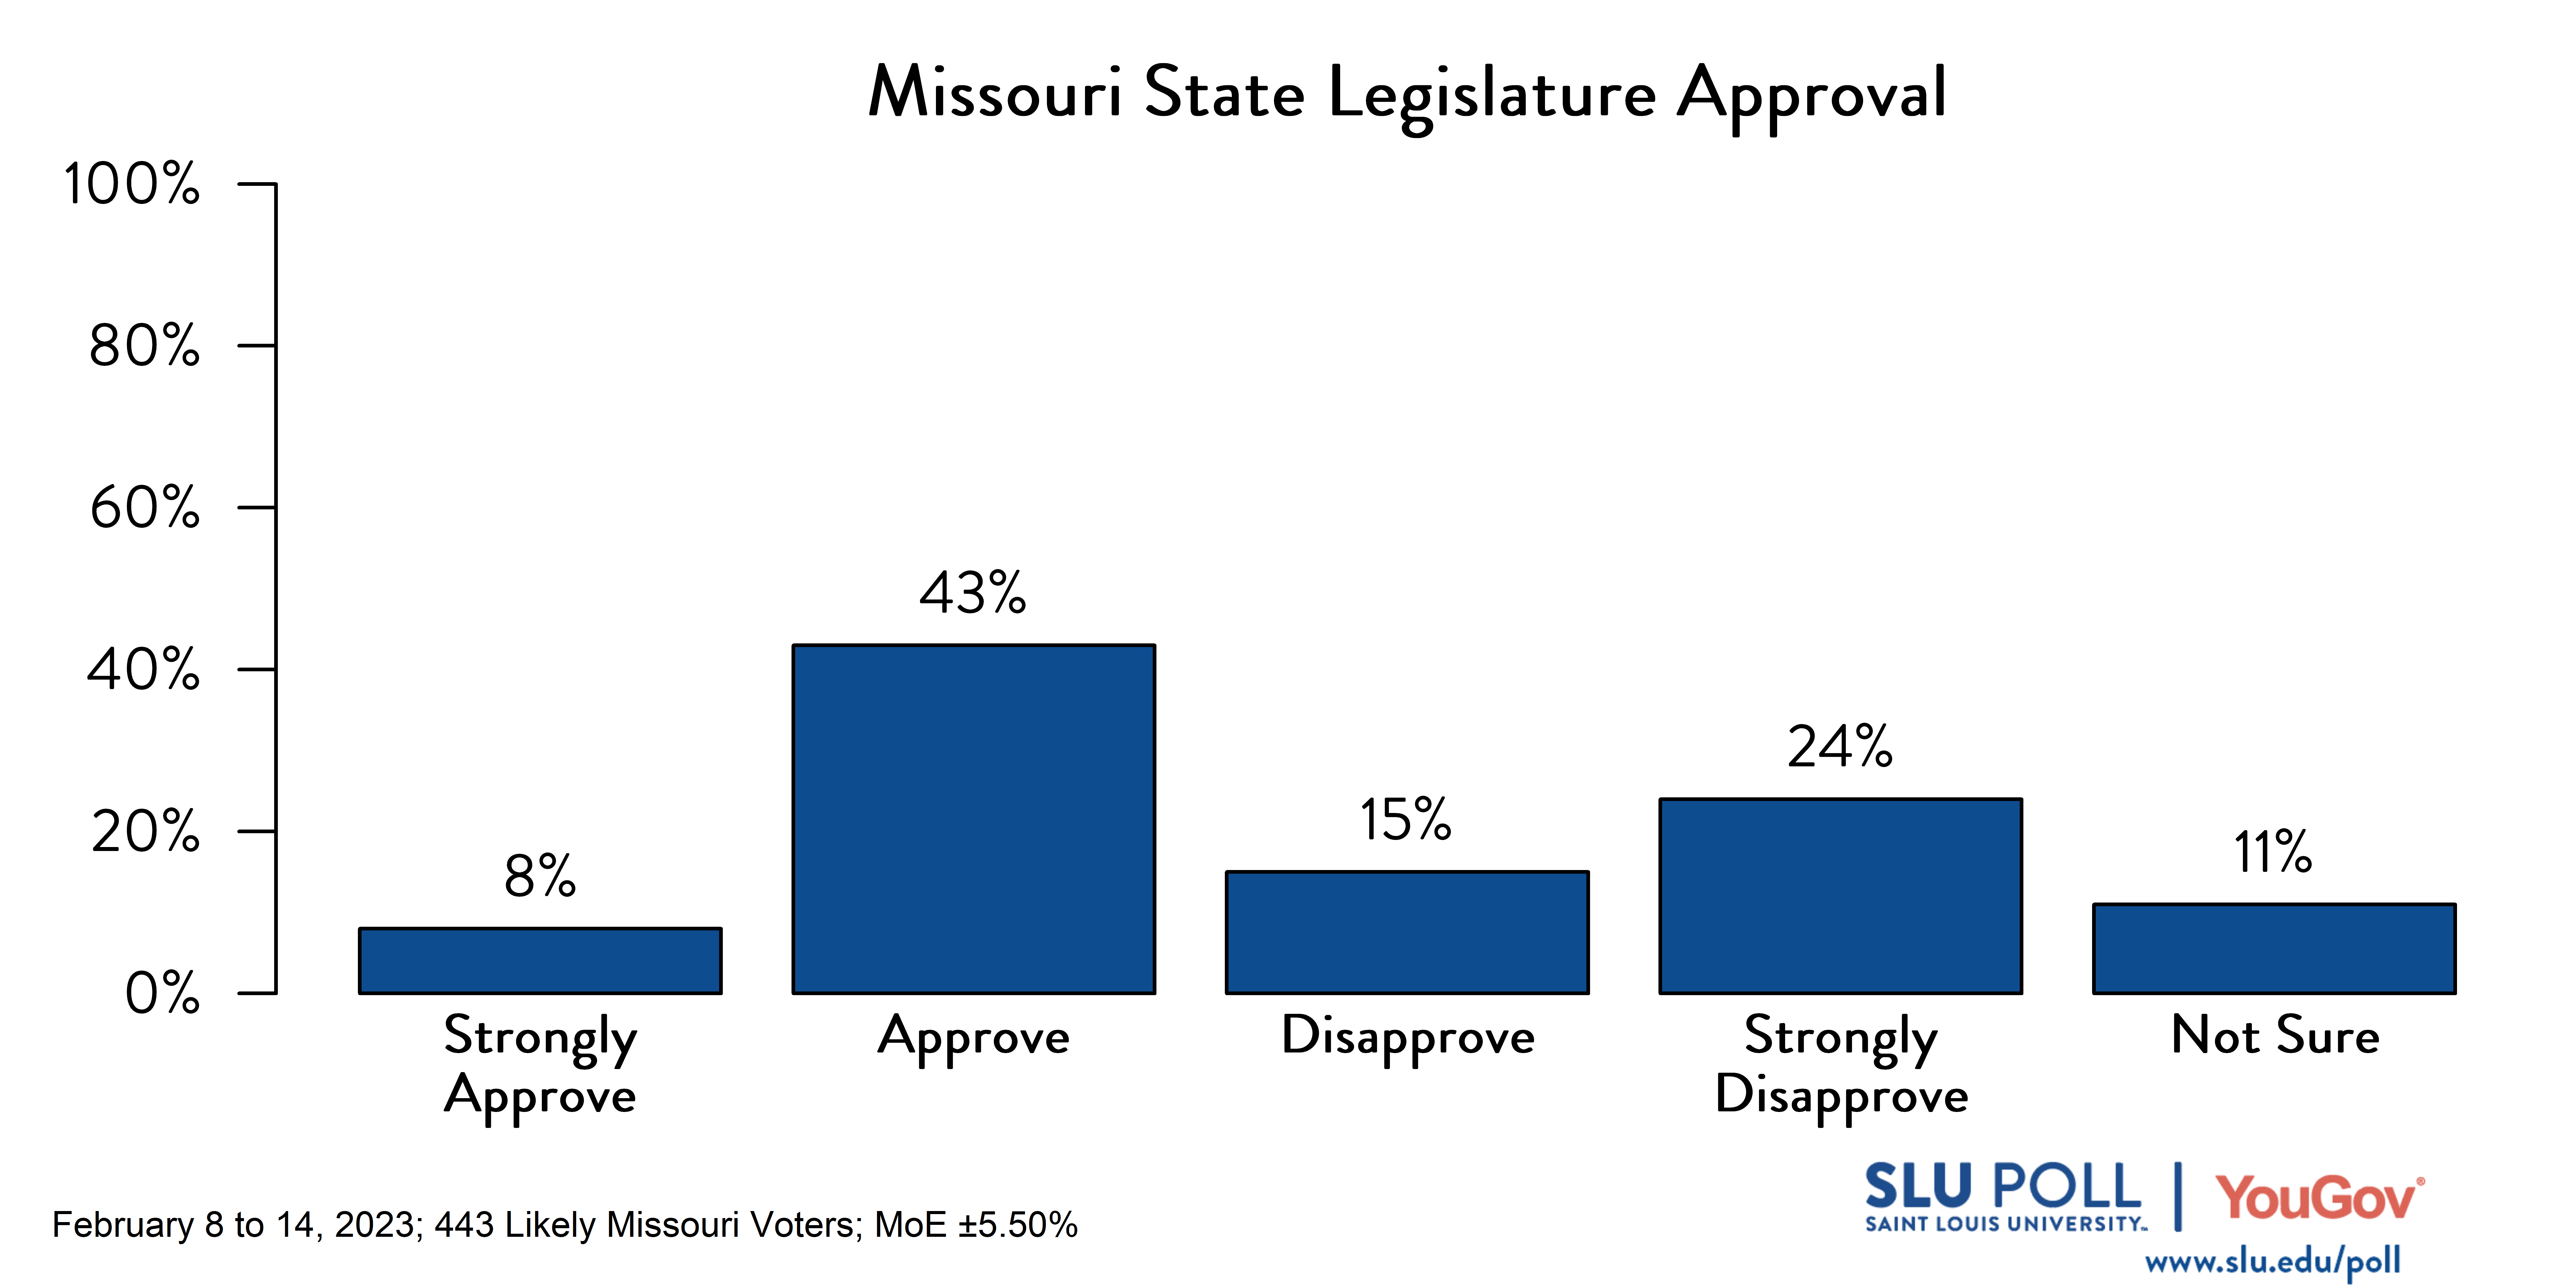 Likely voters' responses to 'Do you approve or disapprove of the way each is doing their job: The Missouri State Legislature?': 8% Strongly approve, 43% Approve, 15% Disapprove, 24% Strongly disapprove, and 11% Not sure.